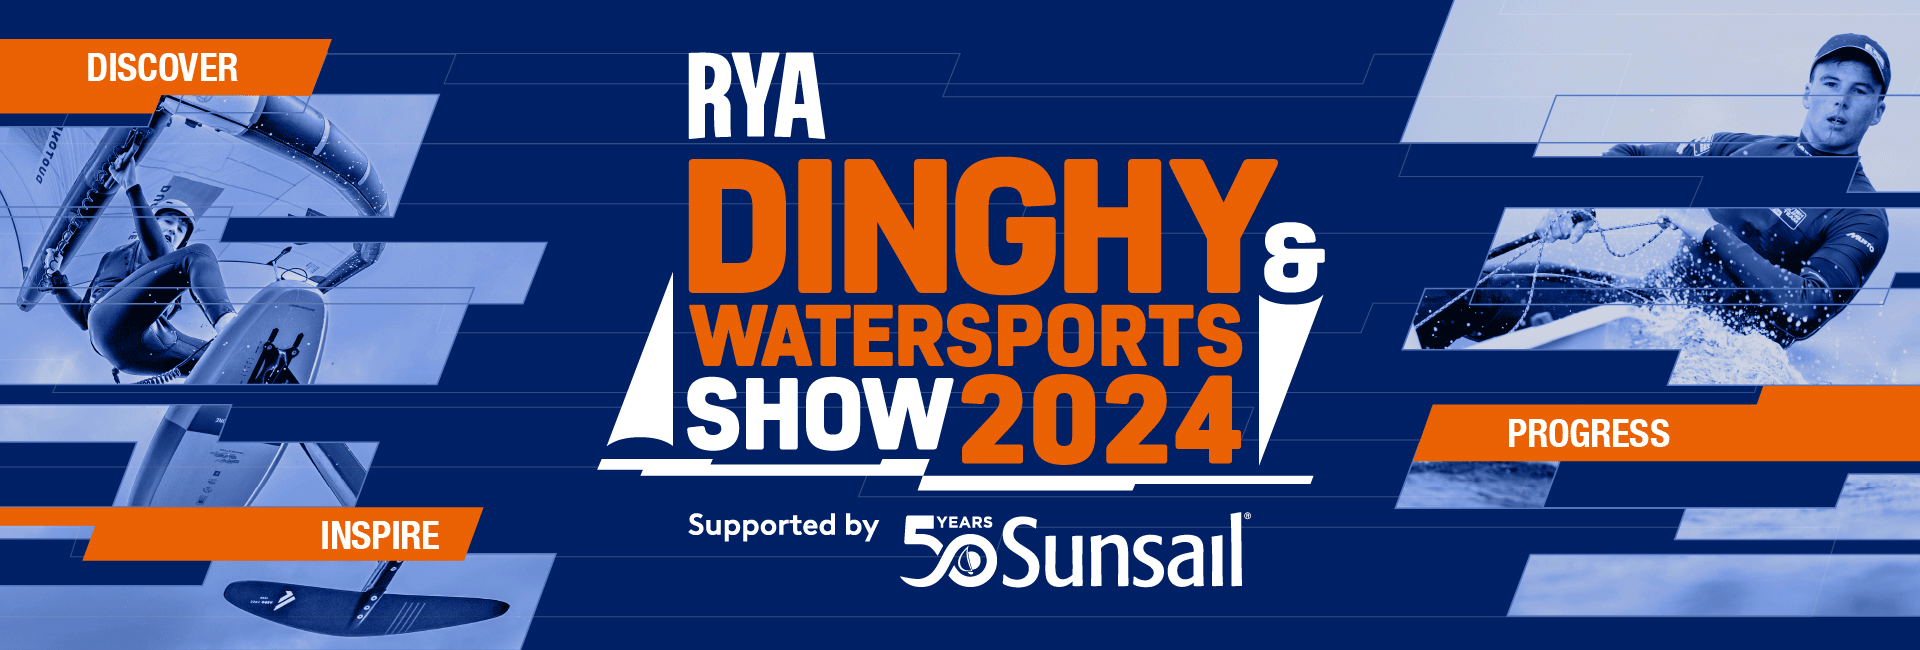 Welcome to the RYA 2024 Dinghy and Watersports show supported by Sunsail